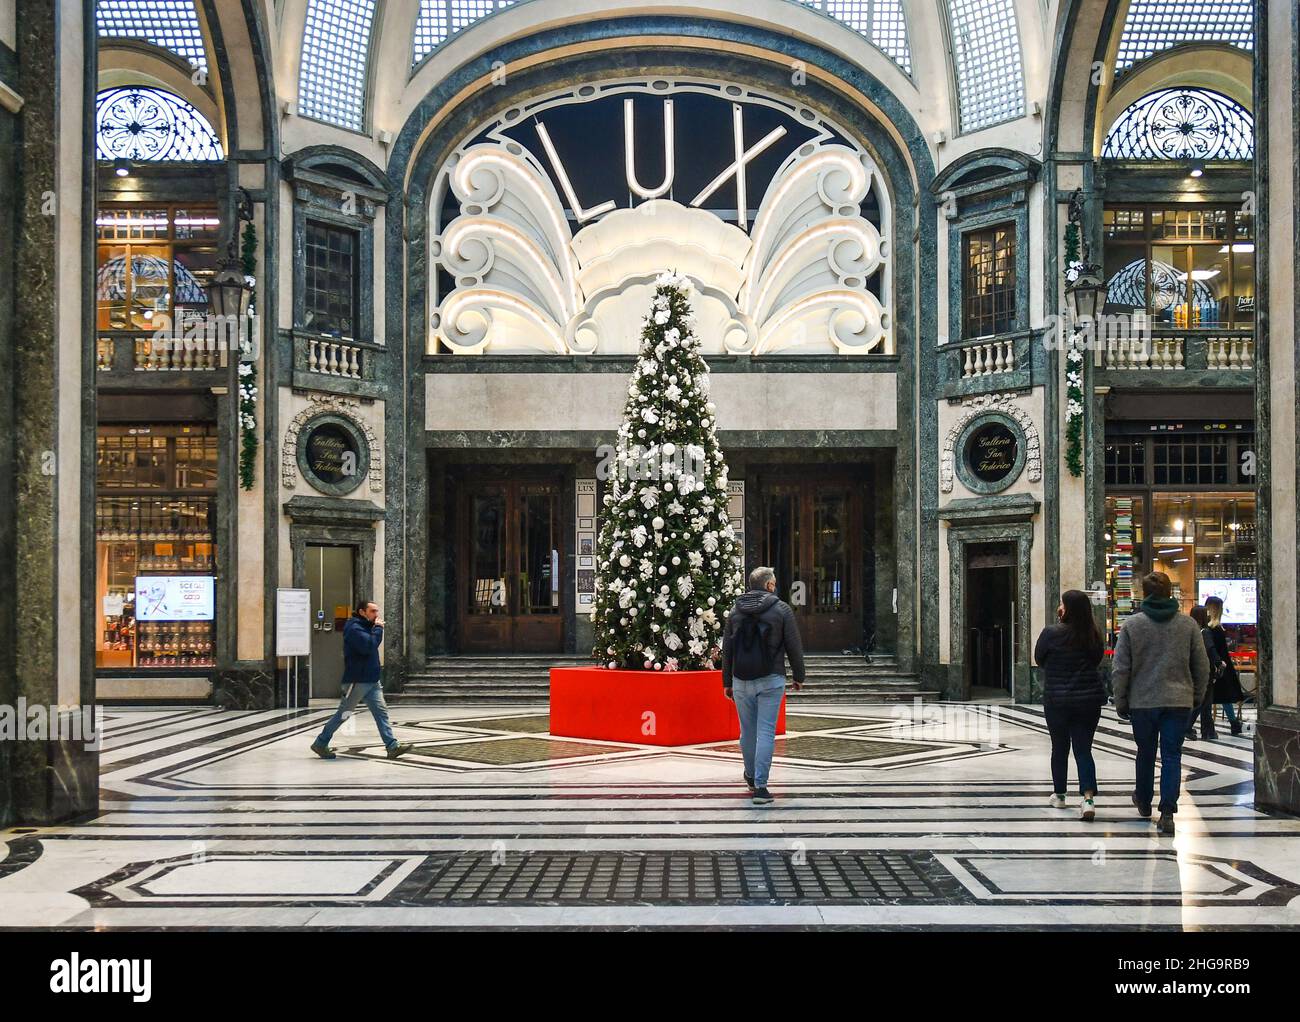 The Galleria San Federico shopping arcade with a big Christmas tree in front of the entrance of the Lux Cinema in the center of Turin, Piedmont, Italy Stock Photo